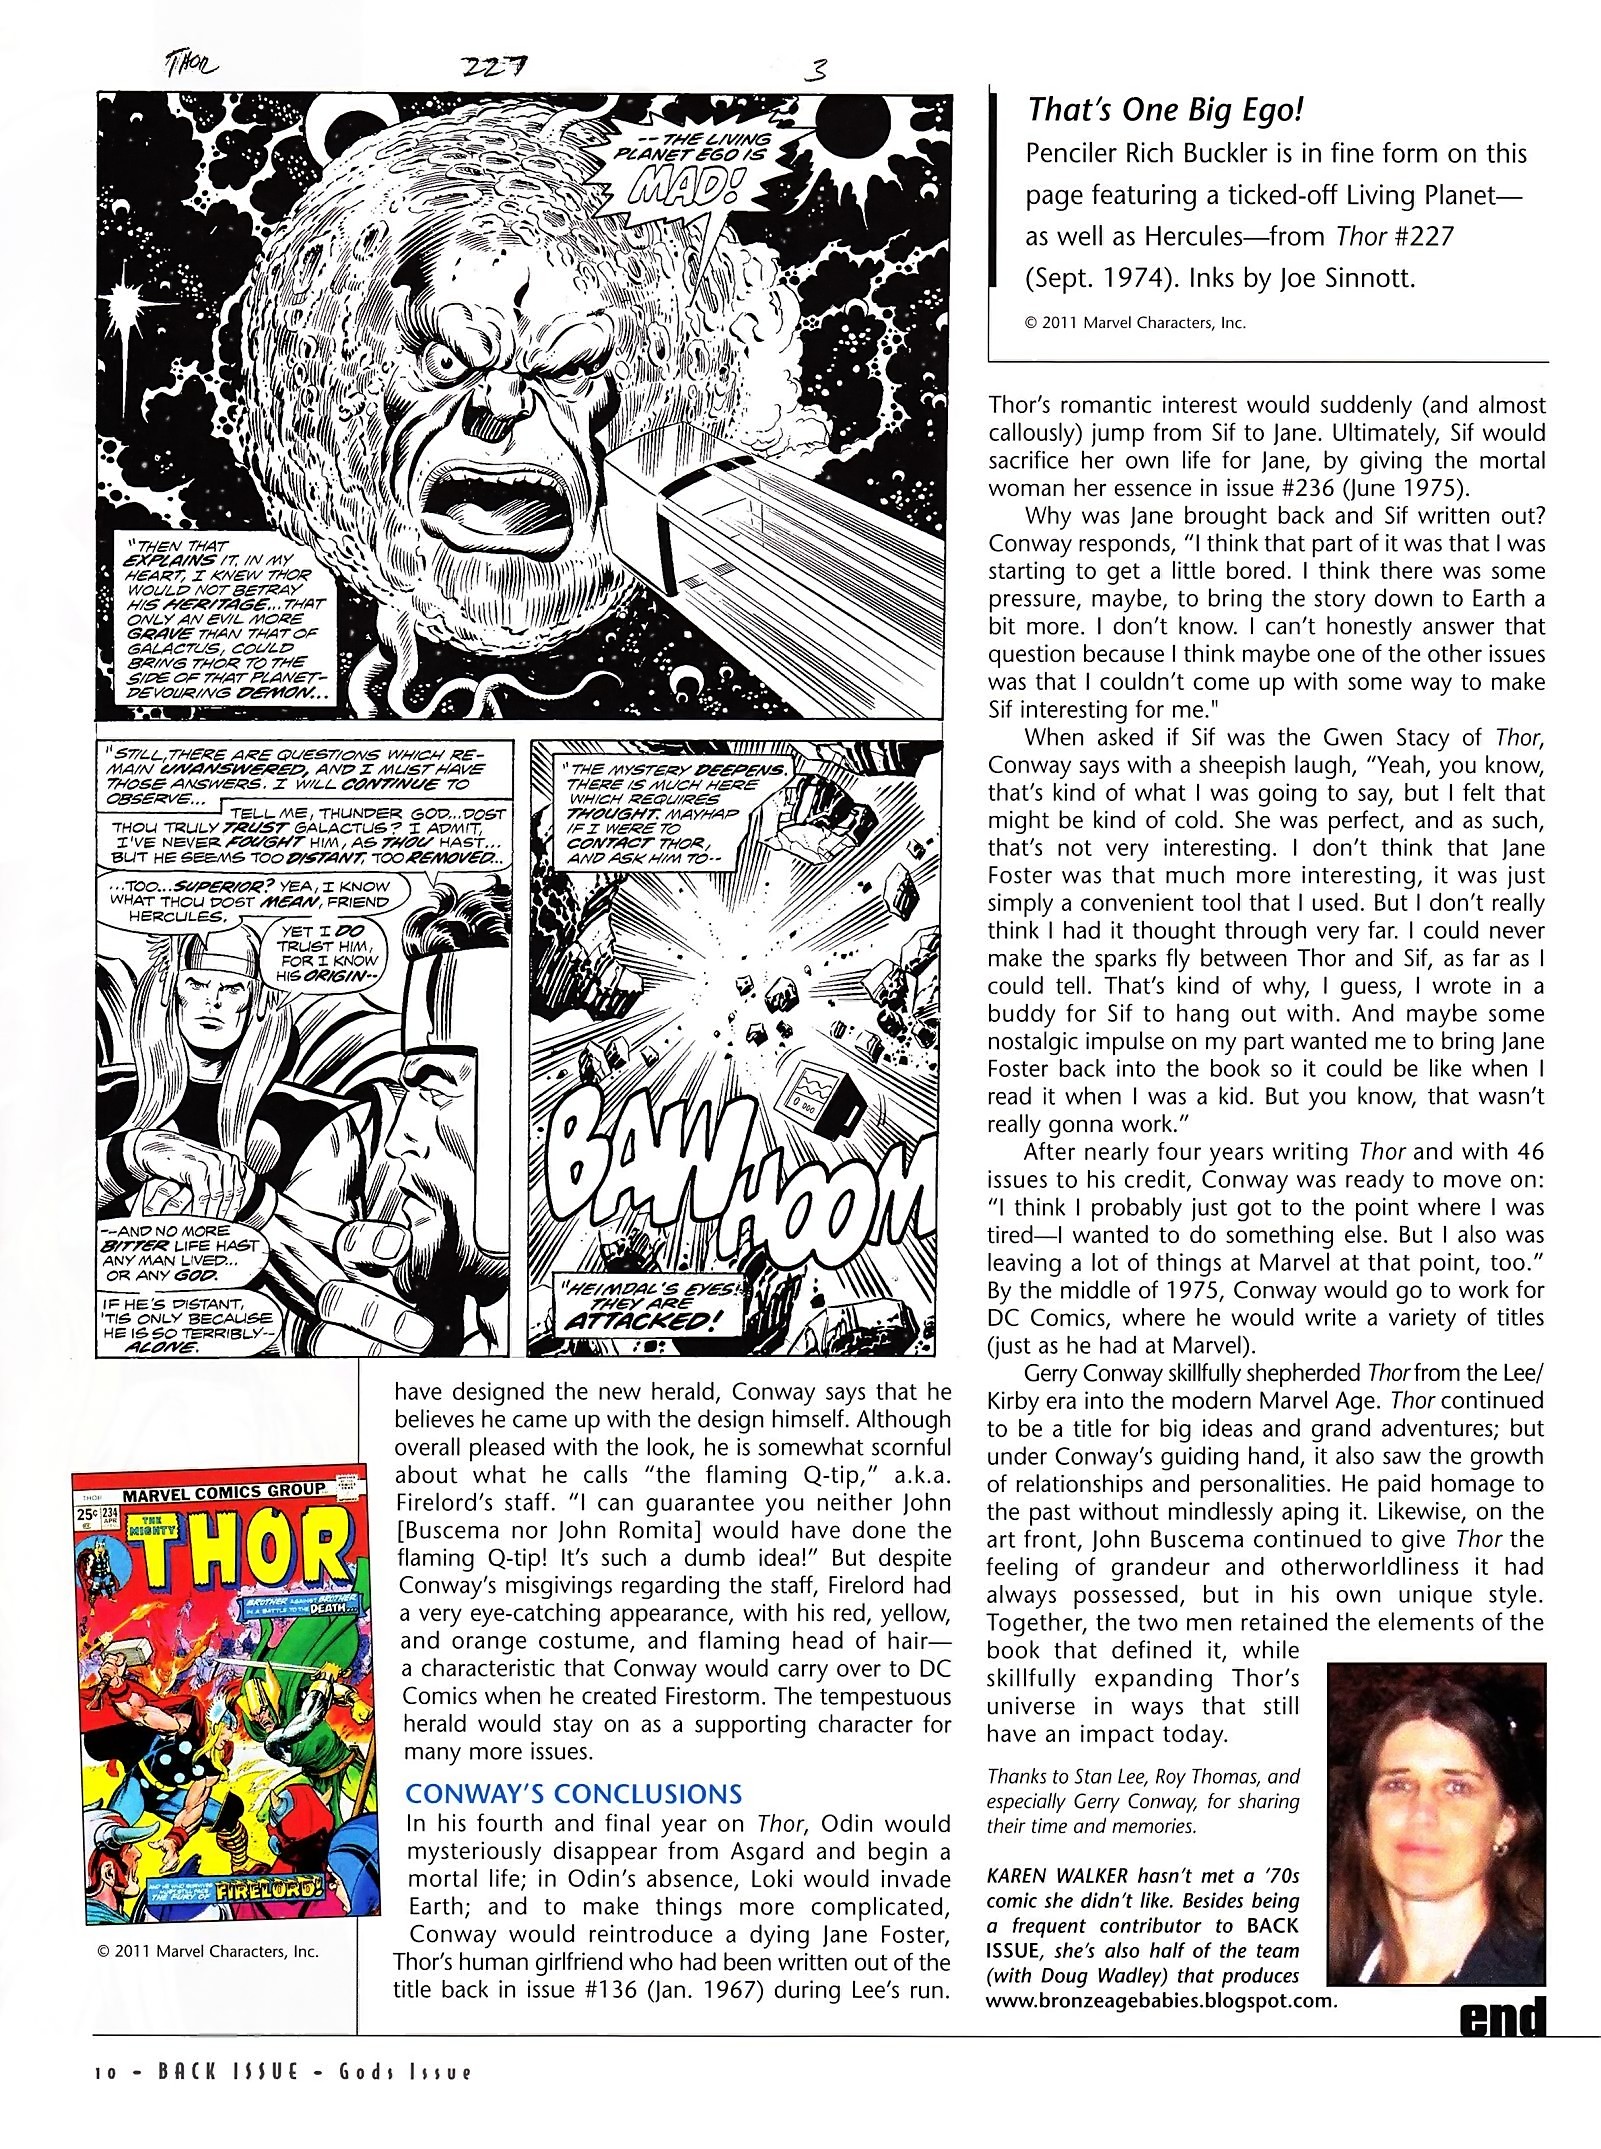 Read online Back Issue comic -  Issue #53 - 12